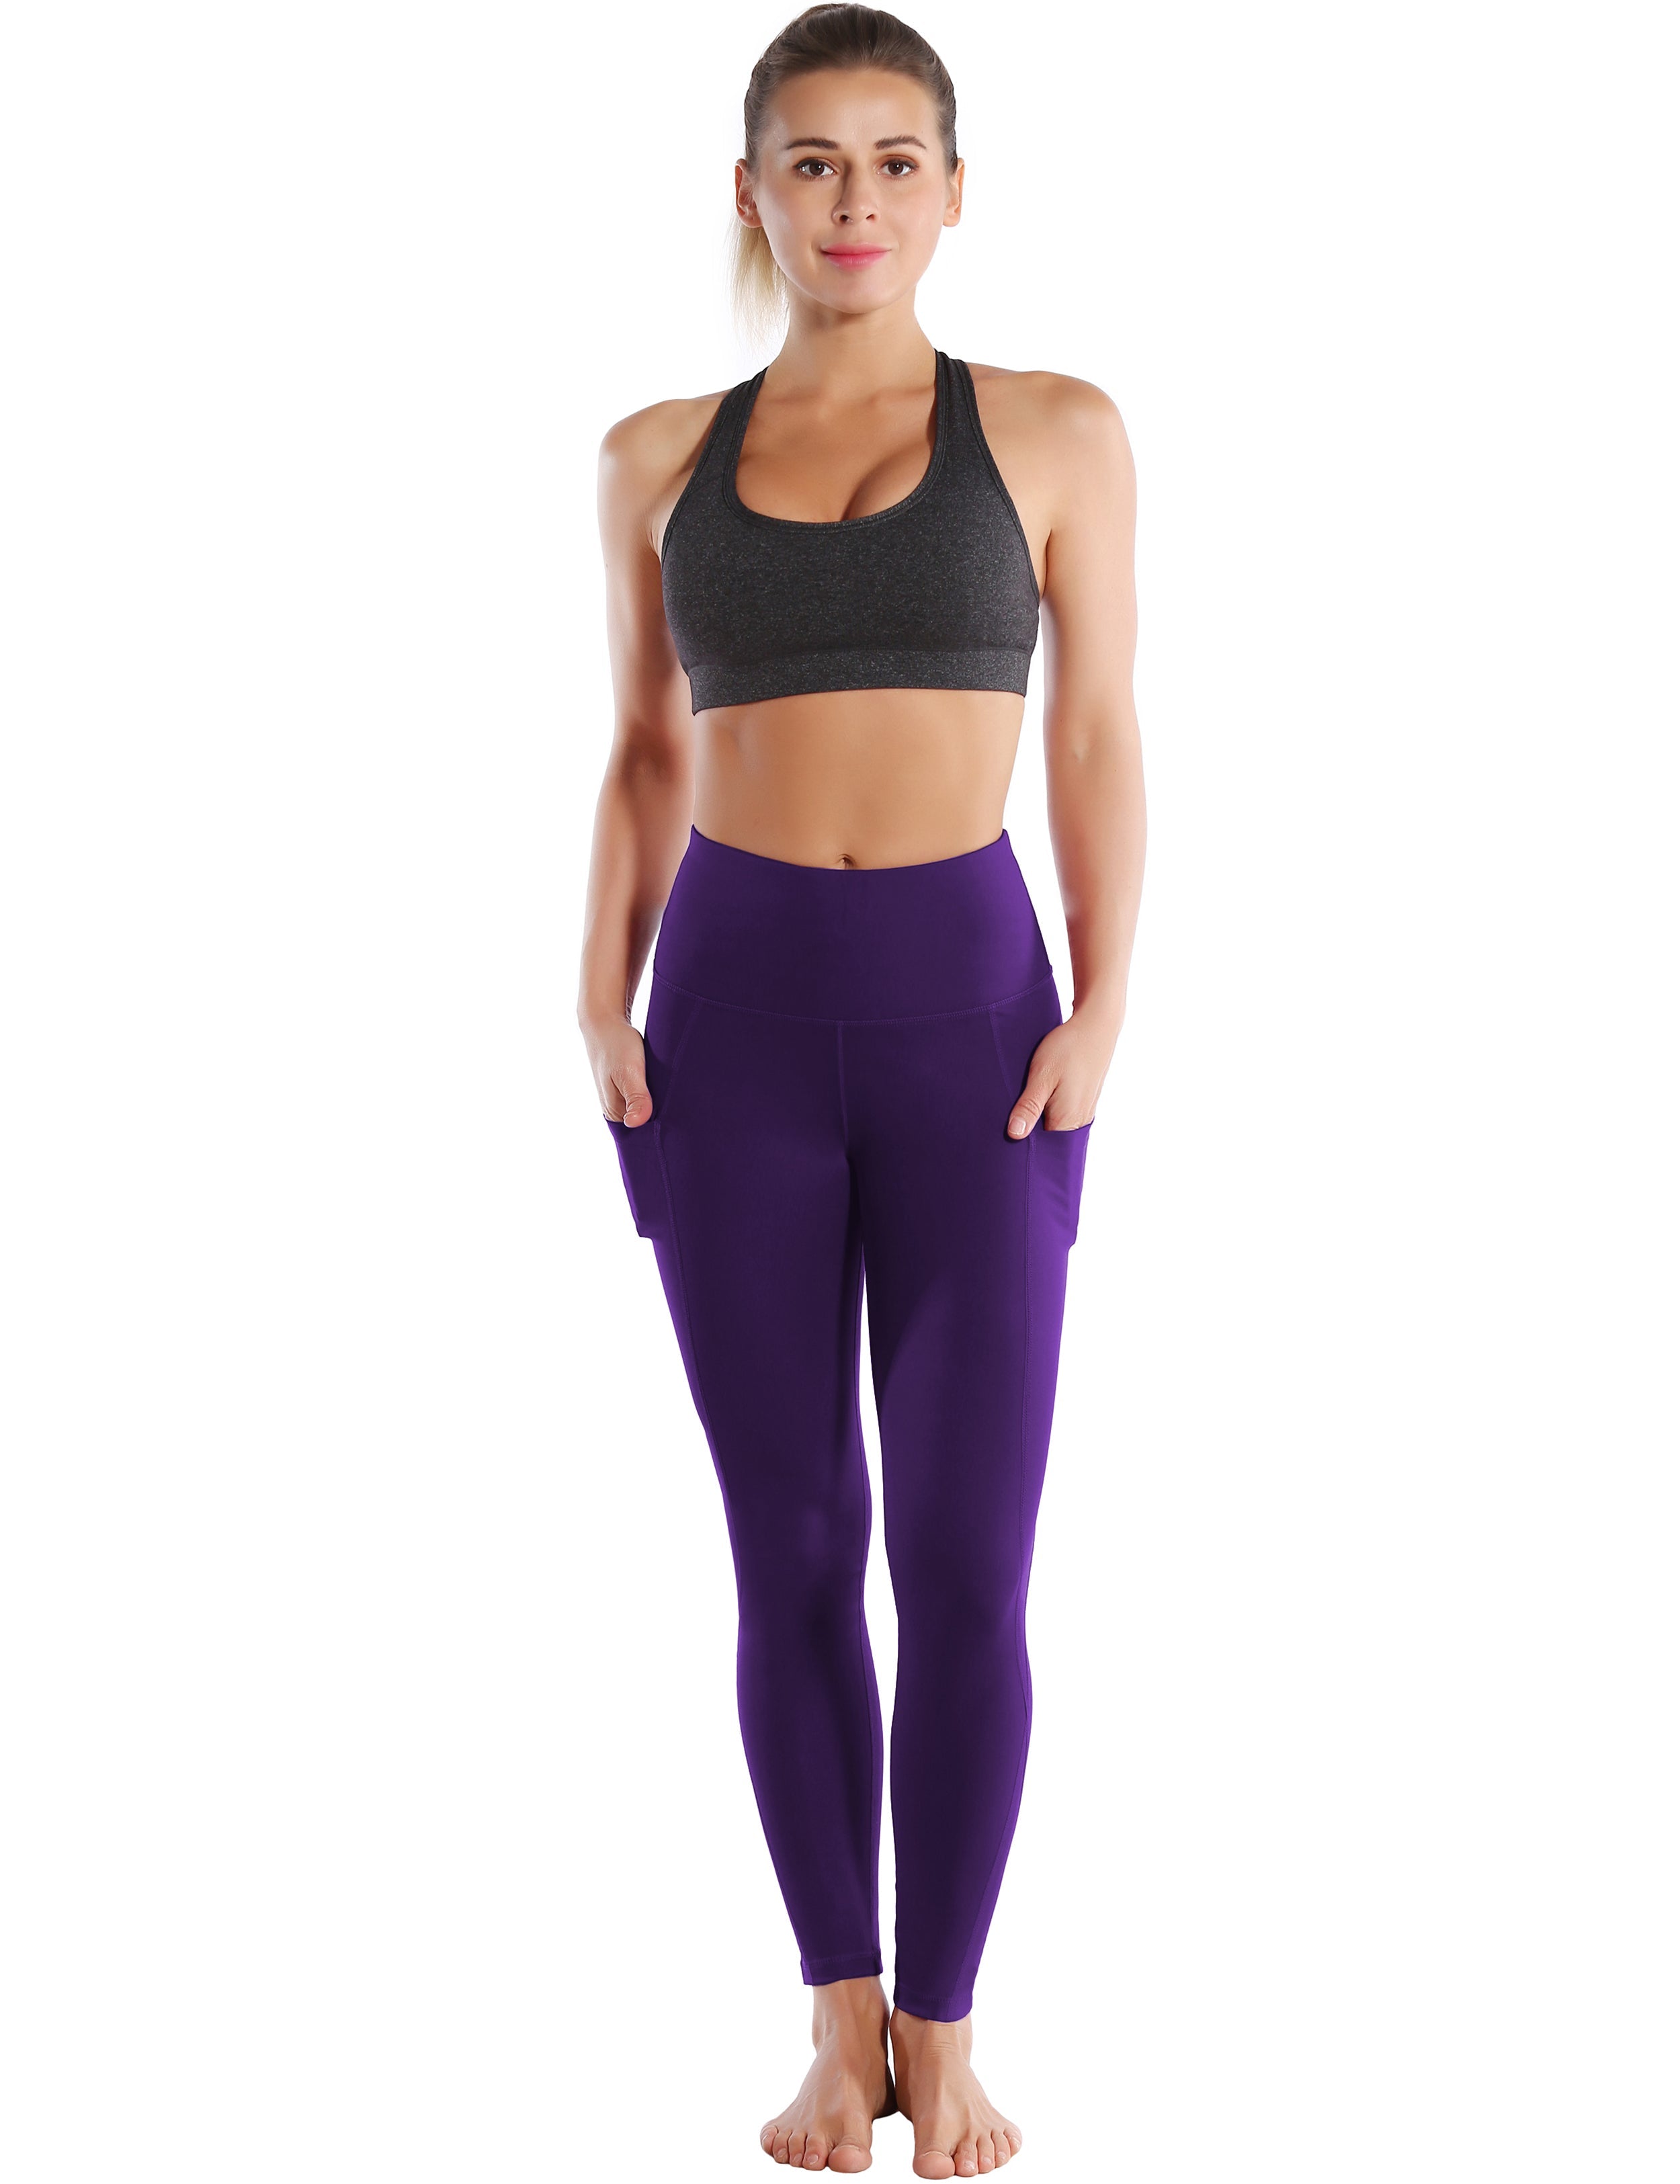 High Waist Side Pockets Running Pants grapevine 75% Nylon, 25% Spandex Fabric doesn't attract lint easily 4-way stretch No see-through Moisture-wicking Tummy control Inner pocket